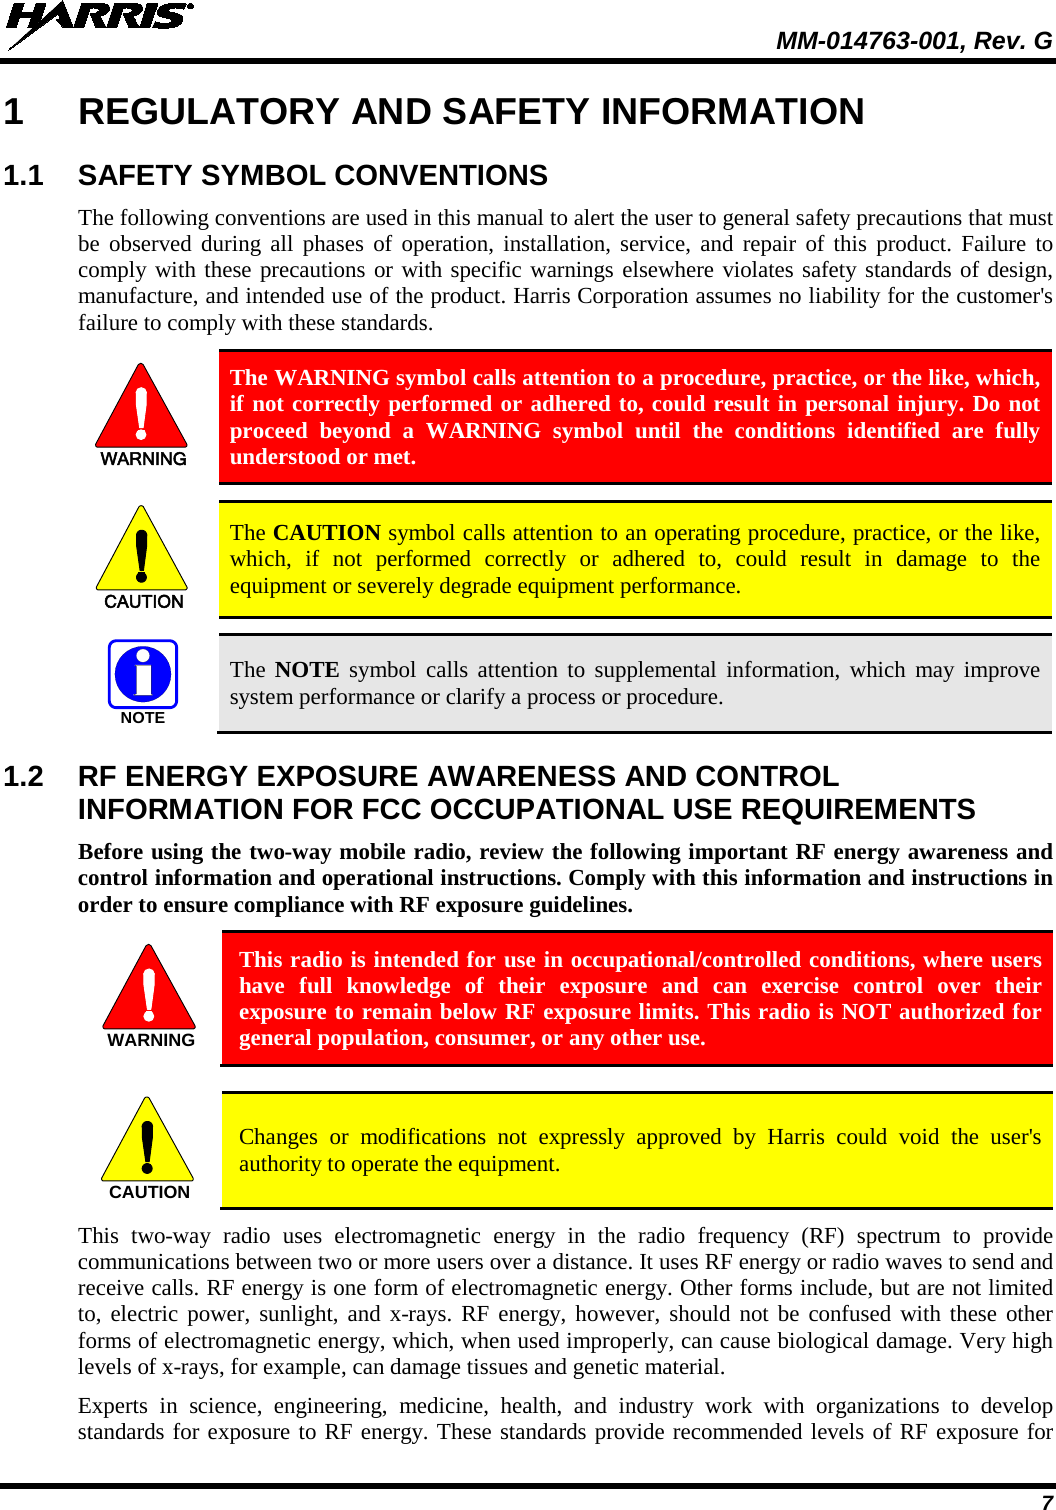  MM-014763-001, Rev. G 7 1  REGULATORY AND SAFETY INFORMATION 1.1  SAFETY SYMBOL CONVENTIONS The following conventions are used in this manual to alert the user to general safety precautions that must be observed during all phases of operation, installation, service, and repair of this product. Failure to comply with these precautions or with specific warnings elsewhere violates safety standards of design, manufacture, and intended use of the product. Harris Corporation assumes no liability for the customer&apos;s failure to comply with these standards. WARNING The WARNING symbol calls attention to a procedure, practice, or the like, which, if not correctly performed or adhered to, could result in personal injury. Do not proceed beyond a WARNING symbol until the conditions identified are fully understood or met.   CAUTION The CAUTION symbol calls attention to an operating procedure, practice, or the like, which, if not performed correctly or adhered to, could result in damage to the equipment or severely degrade equipment performance.   NOTE The NOTE symbol calls attention to supplemental information, which may improve system performance or clarify a process or procedure. 1.2  RF ENERGY EXPOSURE AWARENESS AND CONTROL INFORMATION FOR FCC OCCUPATIONAL USE REQUIREMENTS Before using the two-way mobile radio, review the following important RF energy awareness and control information and operational instructions. Comply with this information and instructions in order to ensure compliance with RF exposure guidelines.  This radio is intended for use in occupational/controlled conditions, where users have full knowledge of their exposure and can exercise control over their exposure to remain below RF exposure limits. This radio is NOT authorized for general population, consumer, or any other use.   Changes or modifications not expressly approved by Harris could void the user&apos;s authority to operate the equipment. This two-way radio uses electromagnetic energy in the radio frequency (RF) spectrum to provide communications between two or more users over a distance. It uses RF energy or radio waves to send and receive calls. RF energy is one form of electromagnetic energy. Other forms include, but are not limited to, electric power, sunlight, and x-rays. RF energy, however, should not be confused with these other forms of electromagnetic energy, which, when used improperly, can cause biological damage. Very high levels of x-rays, for example, can damage tissues and genetic material. Experts in science, engineering, medicine, health, and industry work with organizations to develop standards for exposure to RF energy. These standards provide recommended levels of RF exposure for WARNINGCAUTION